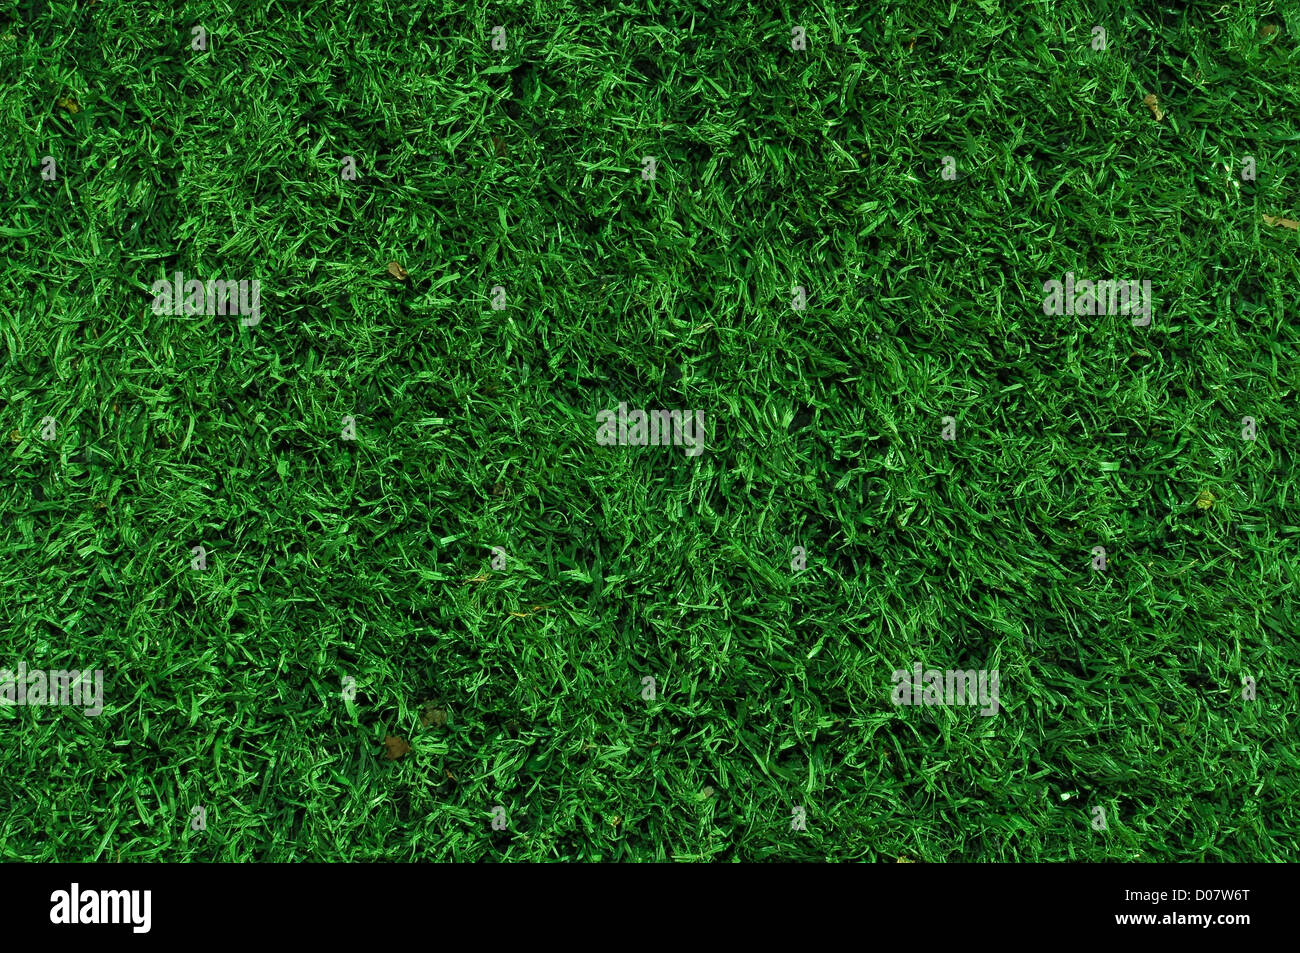 Fake Grass used on sports fields for soccer, baseball and football Stock Photo